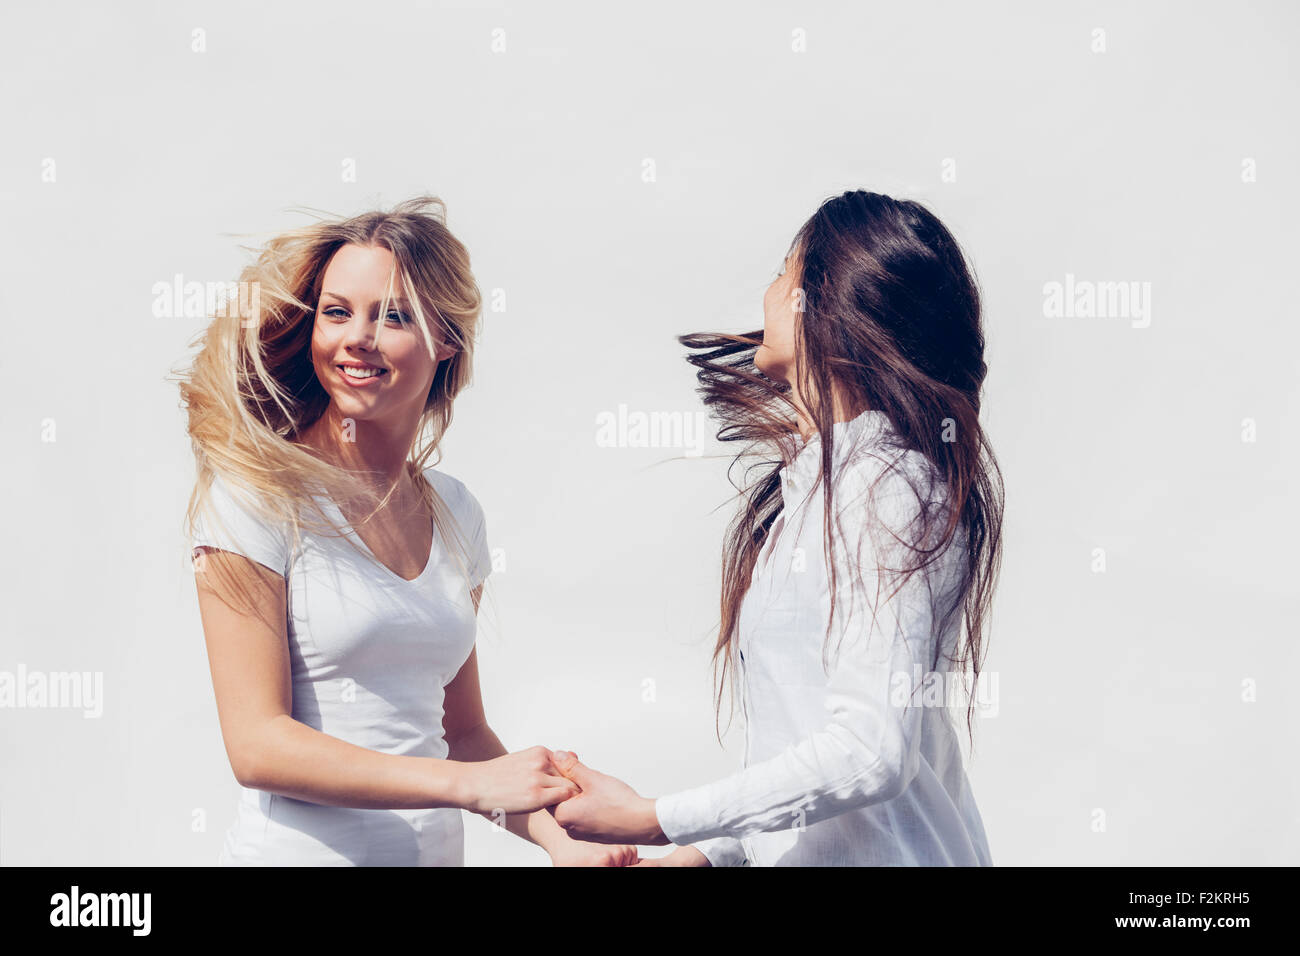 Two young women wearing white clothes tossing her hair in front of white background Stock Photo